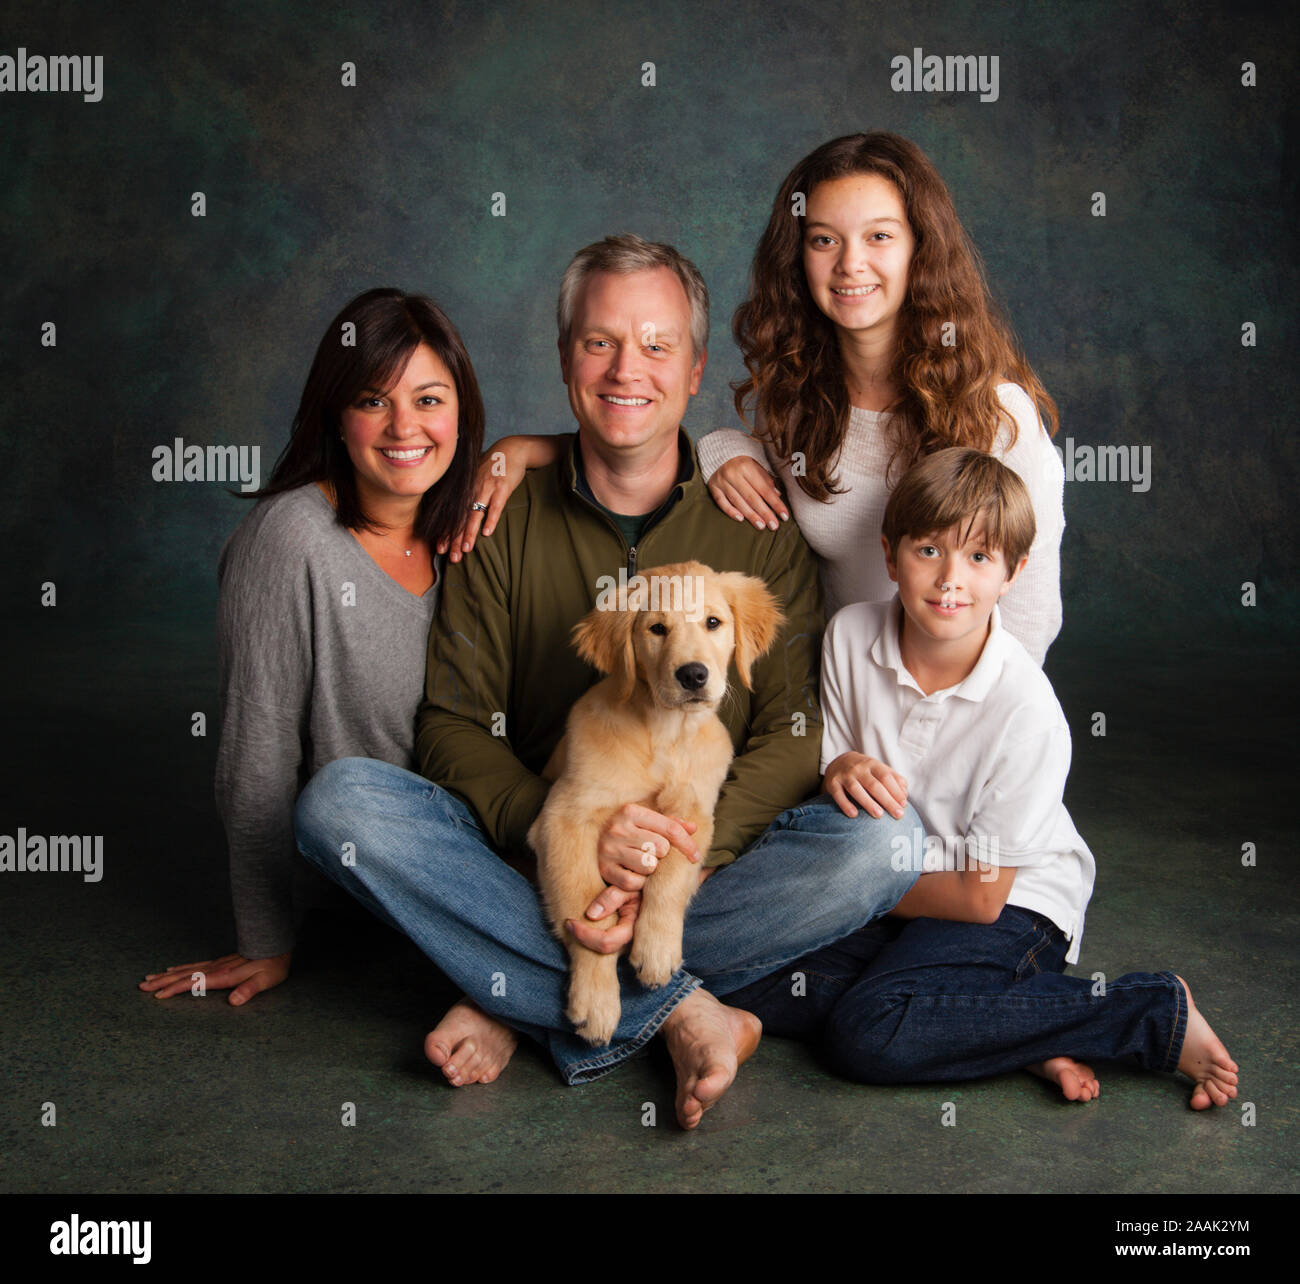 Portrait of family with Golden Retriever puppy Stock Photo